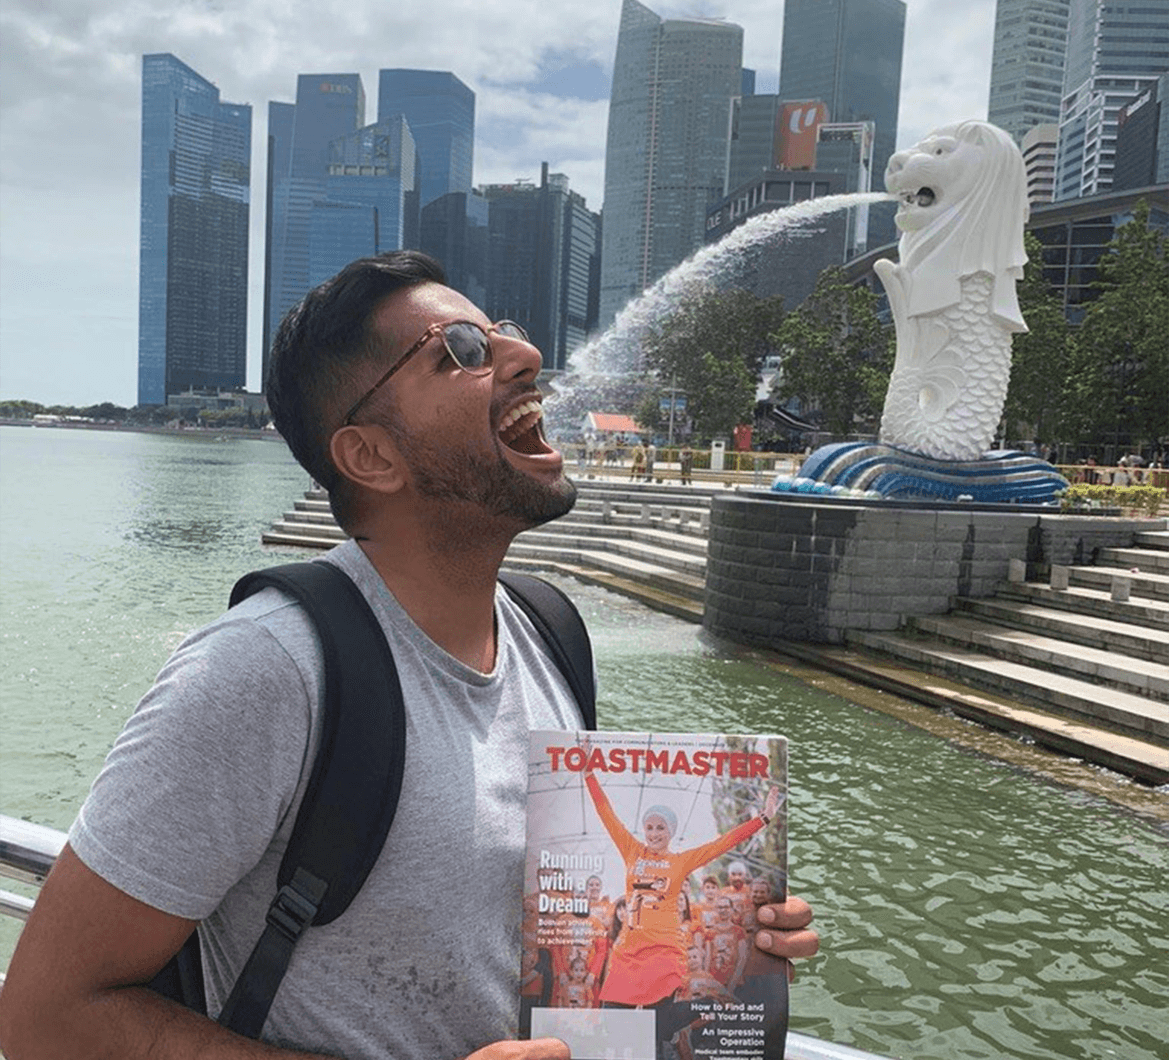 Apurv Baviskar of Melbourne, Victoria, Australia, poses with one of the two Merlion statues in Merlion Park in Singapore. The Merlion is a mythical creature with a lion’s head and fish’s body, which is widely uses as a mascot of Singapore. 